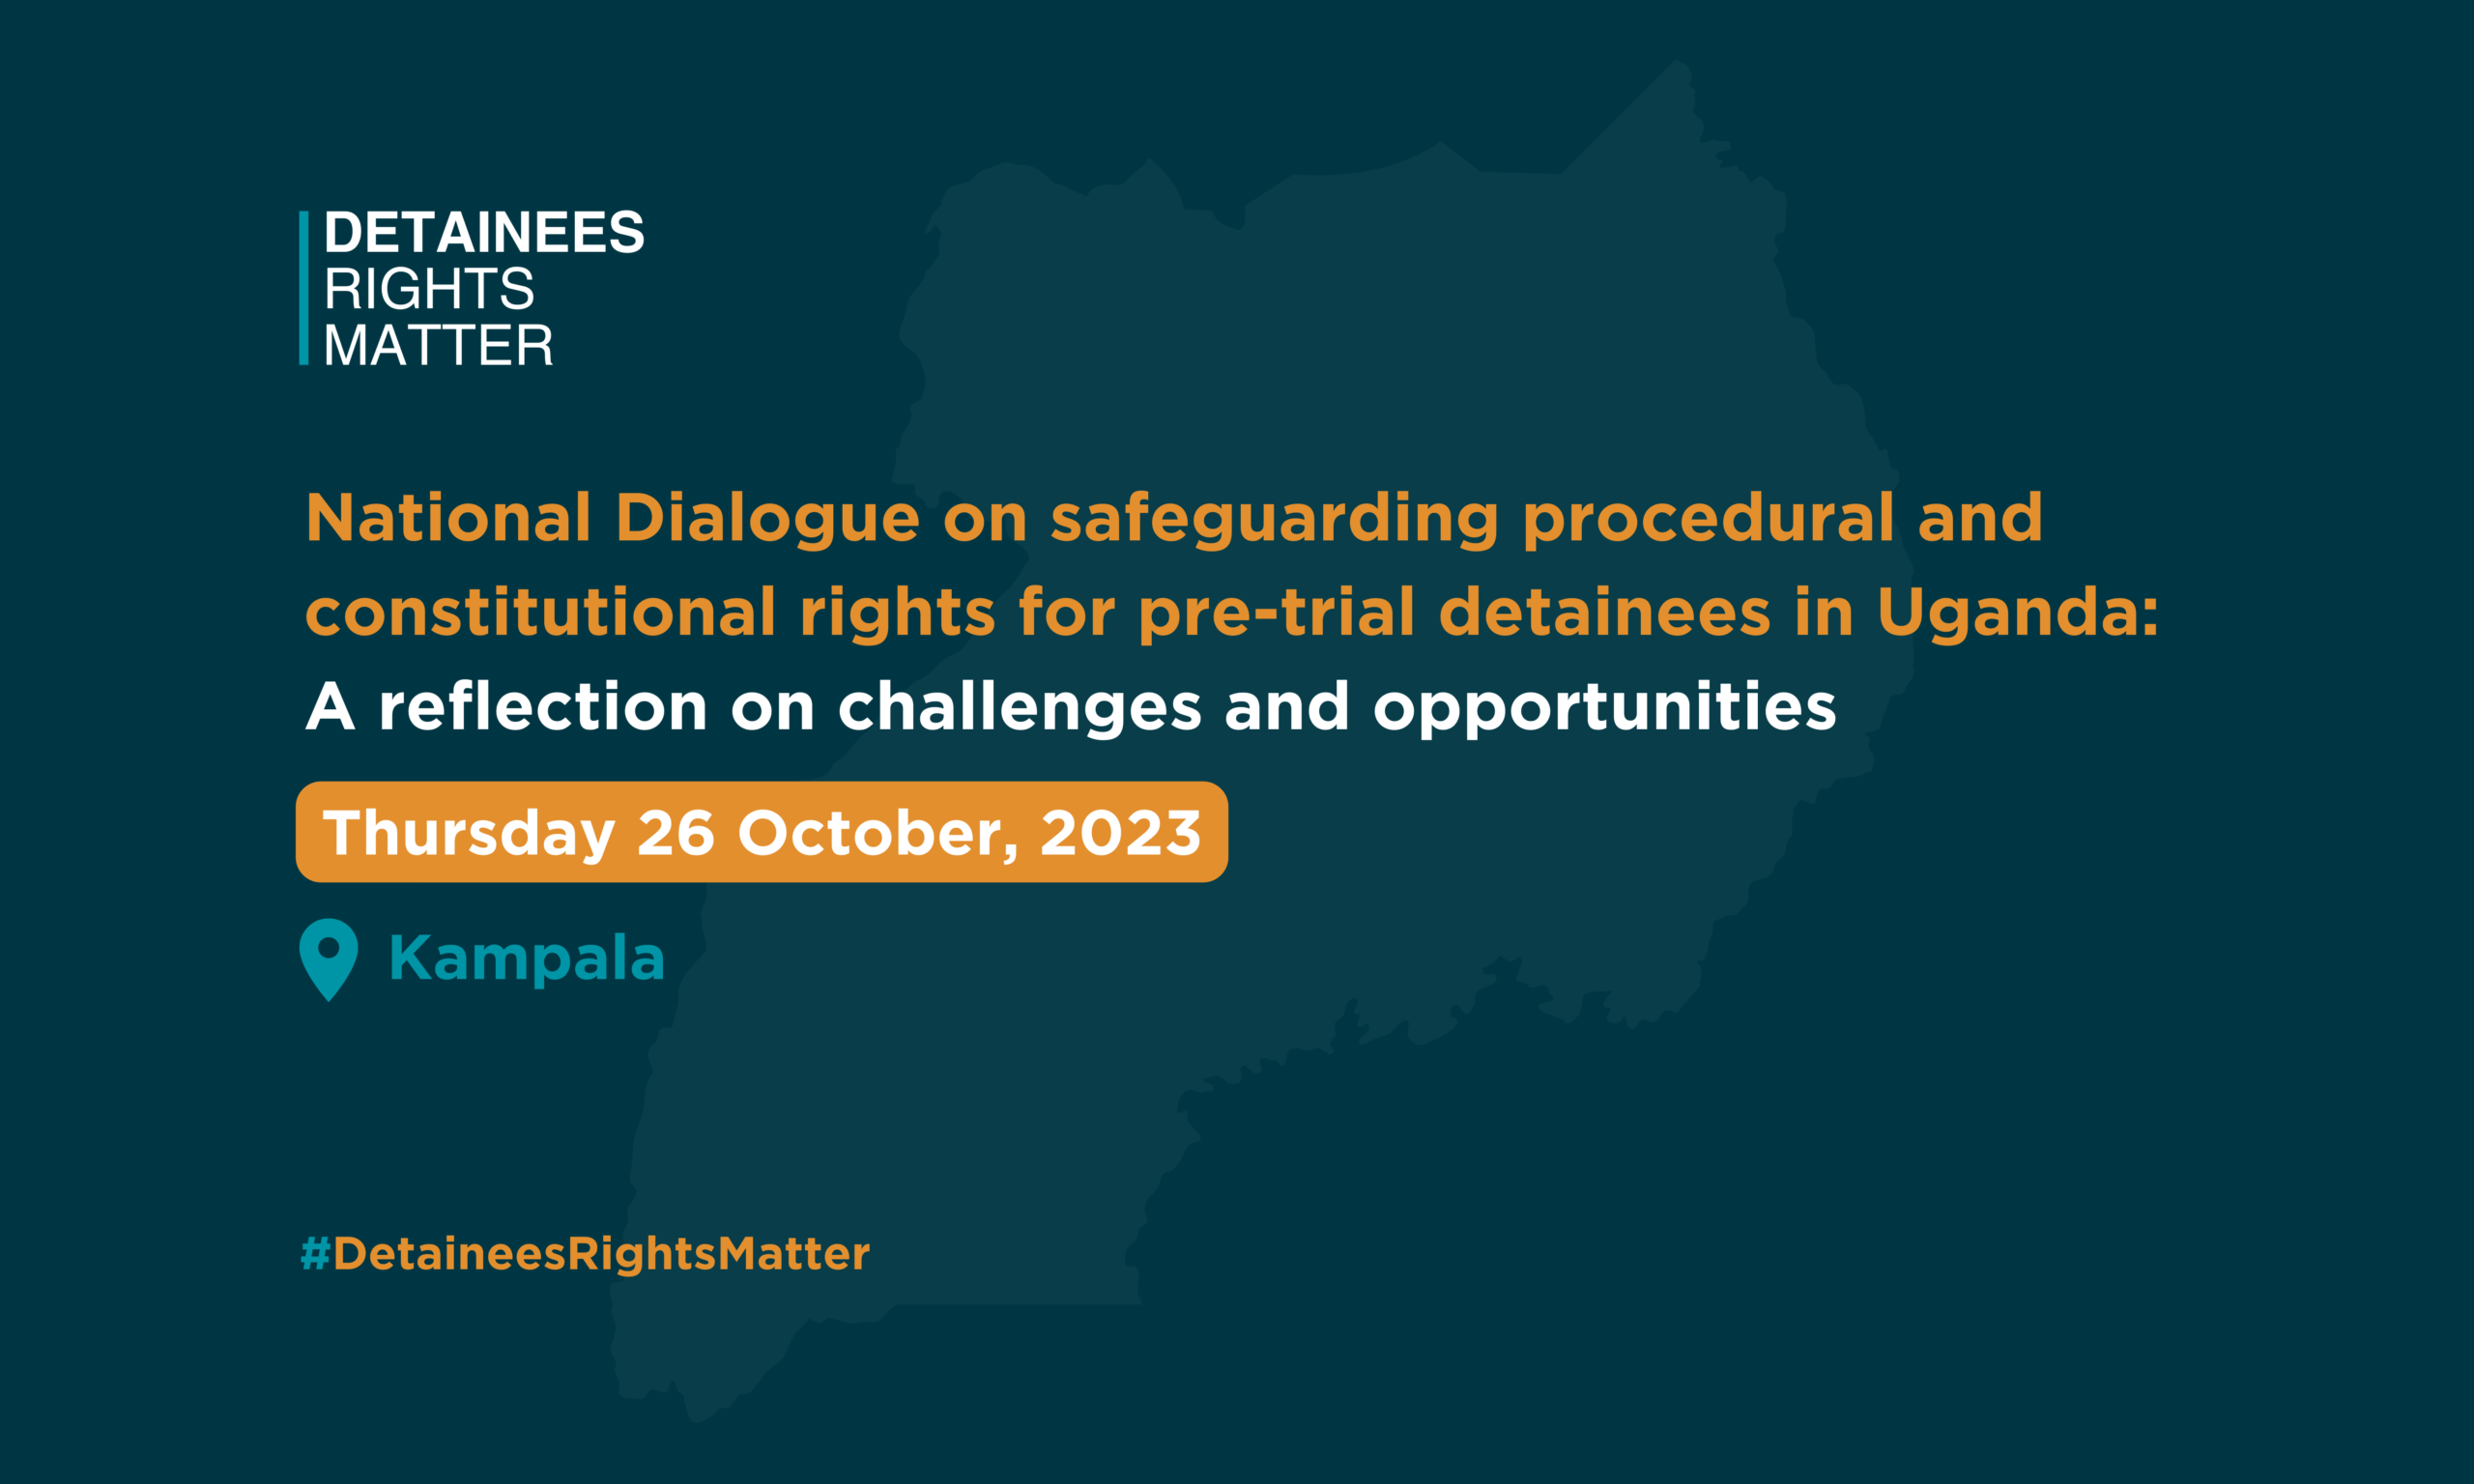 National Dialogue on safeguarding procedural and constitutional rights for pre-trial detainees in Uganda: A reflection on challenges and opportunities